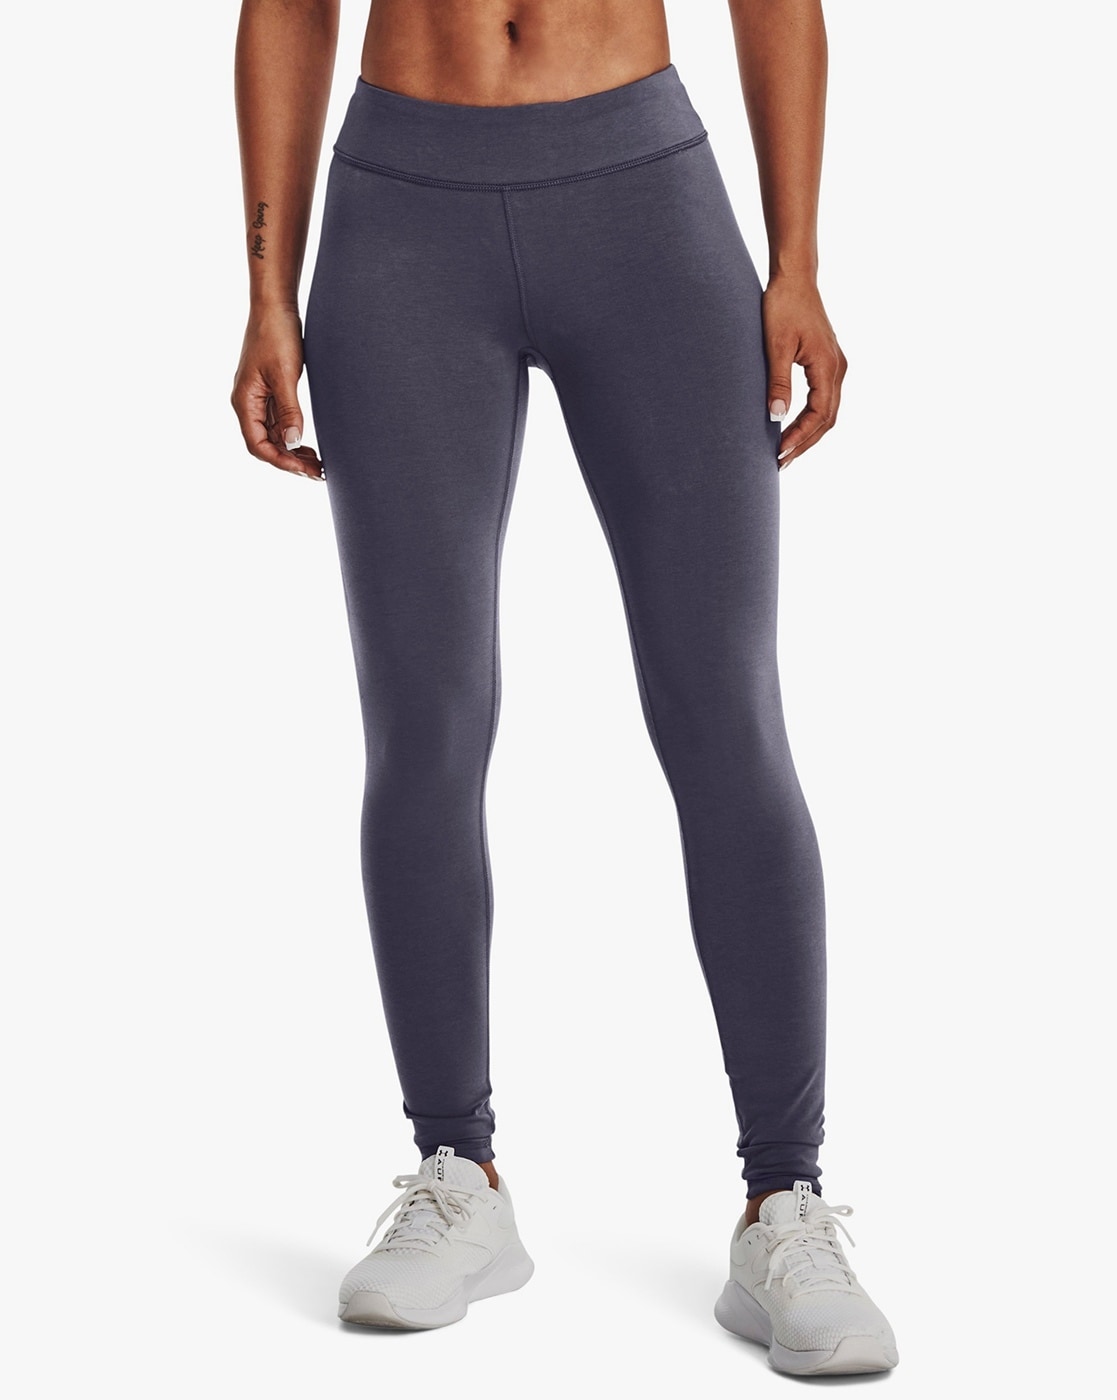 Bring Your Power High Waisted Ankle Leggings, High Waistband, Mix of black  and purple color blocked legging, Branded rubber label on back waistband,  Printed binding, Slim fit, Ankle length, Booty Flattering, Polyester,